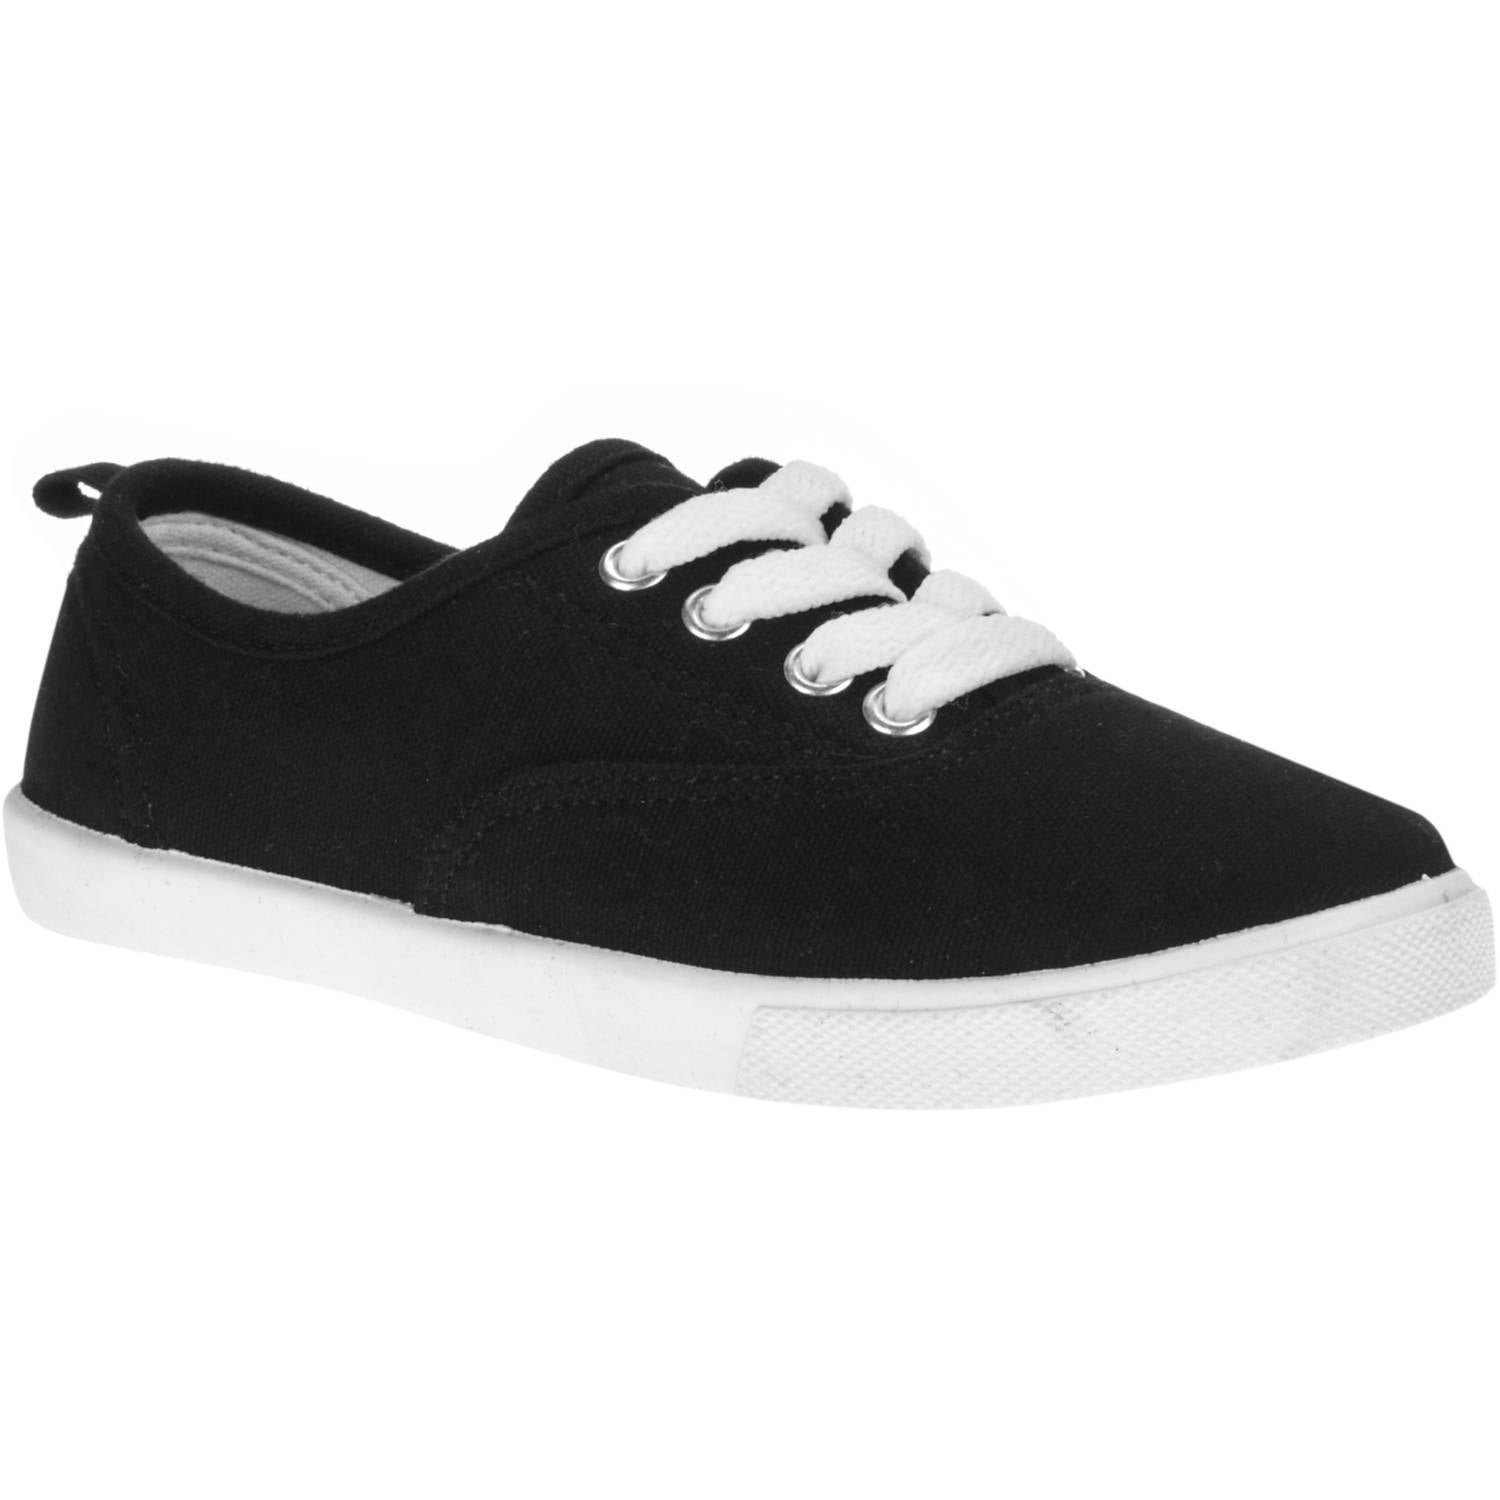 Womens Girls Classic Lace Up Canvas Shoes Casual Comfort Sneakers Athletic